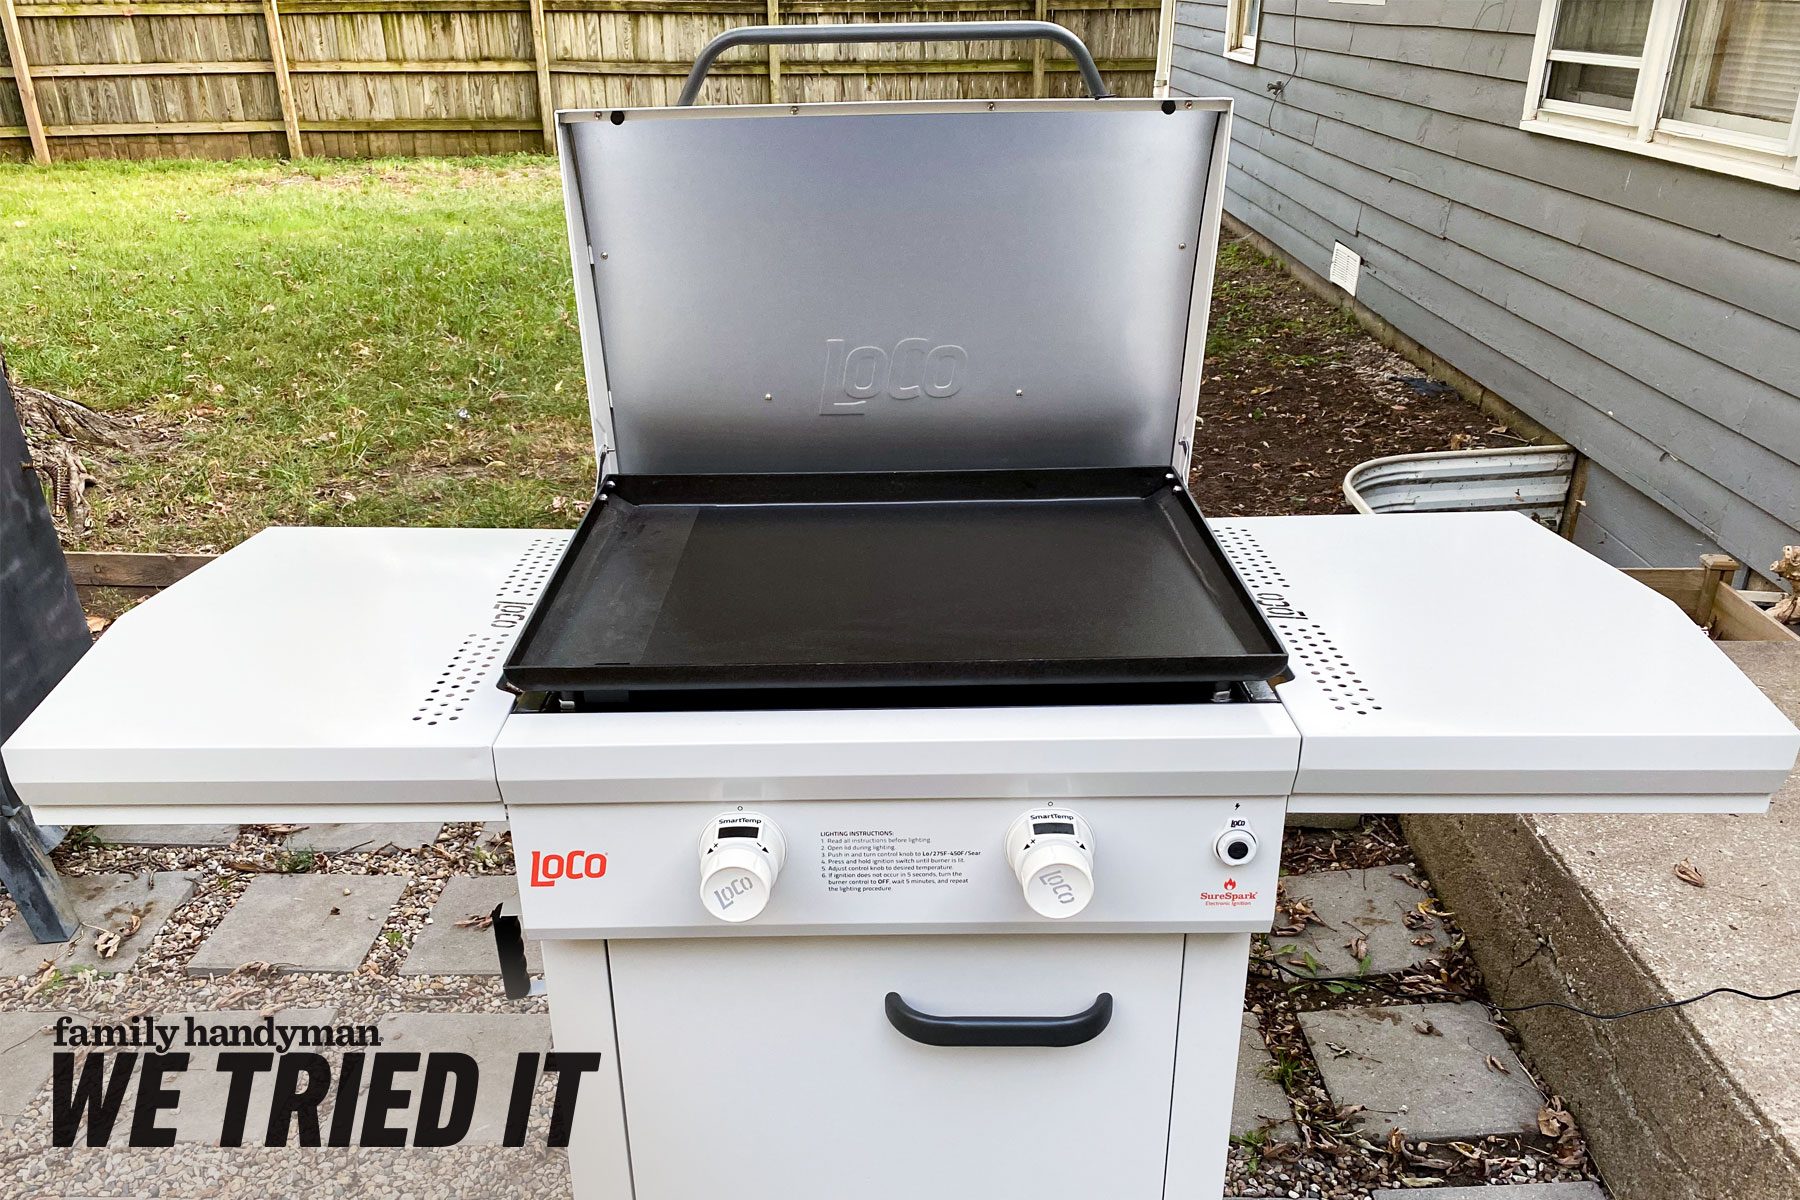 Table Top Grill – Lyfe Tyme, Inc.